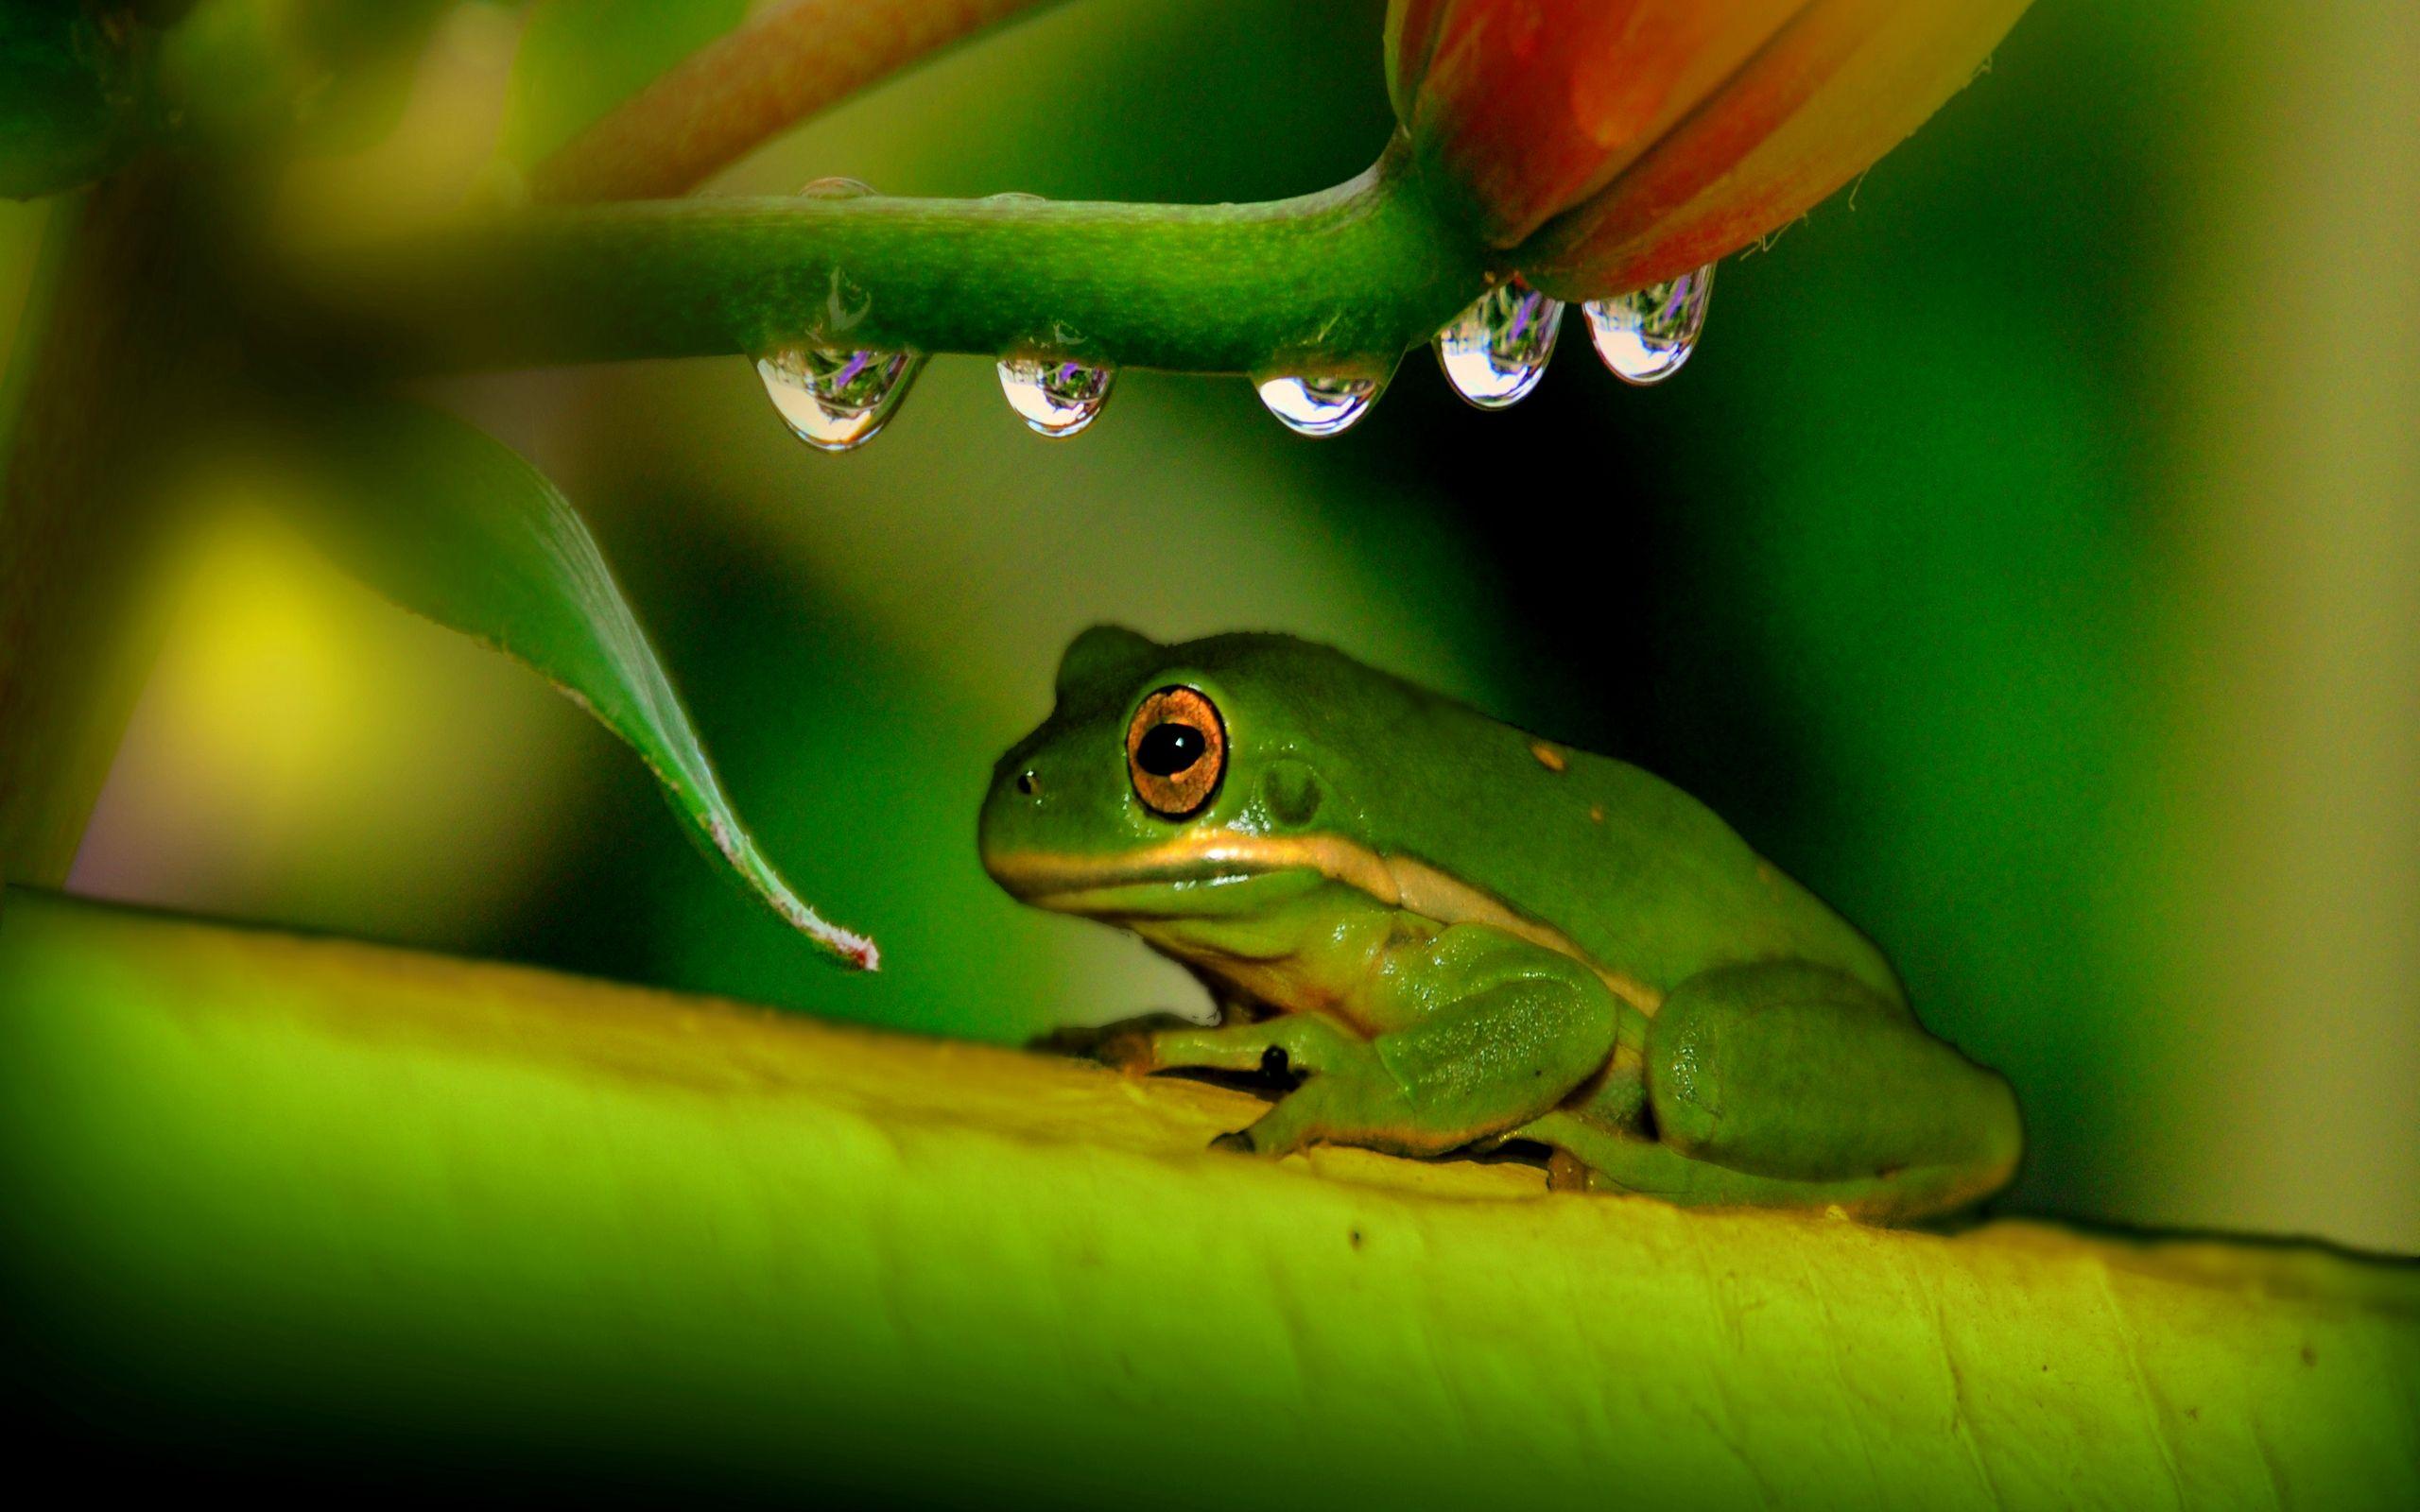 Frog Wallpaper, PC 34 Frog Picture, Fungyung.com